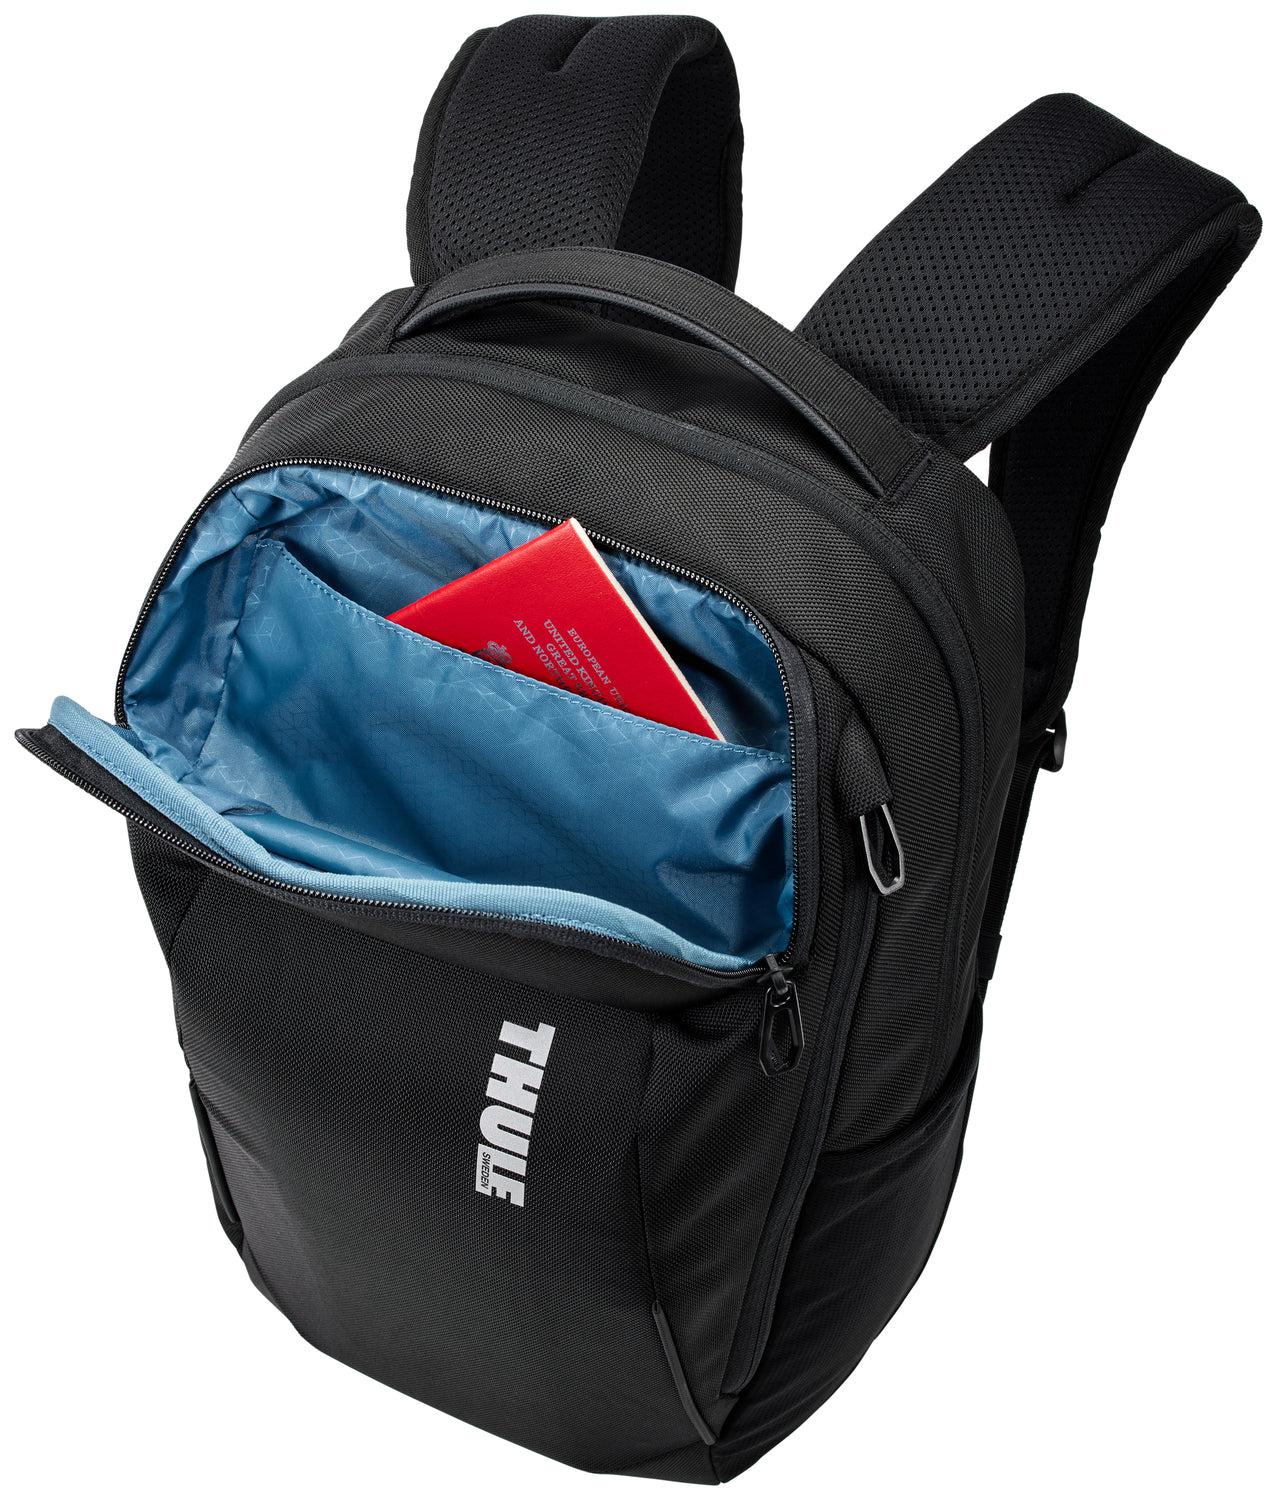 Thule Luggage Accent Backpack 23L – Luggage Pros